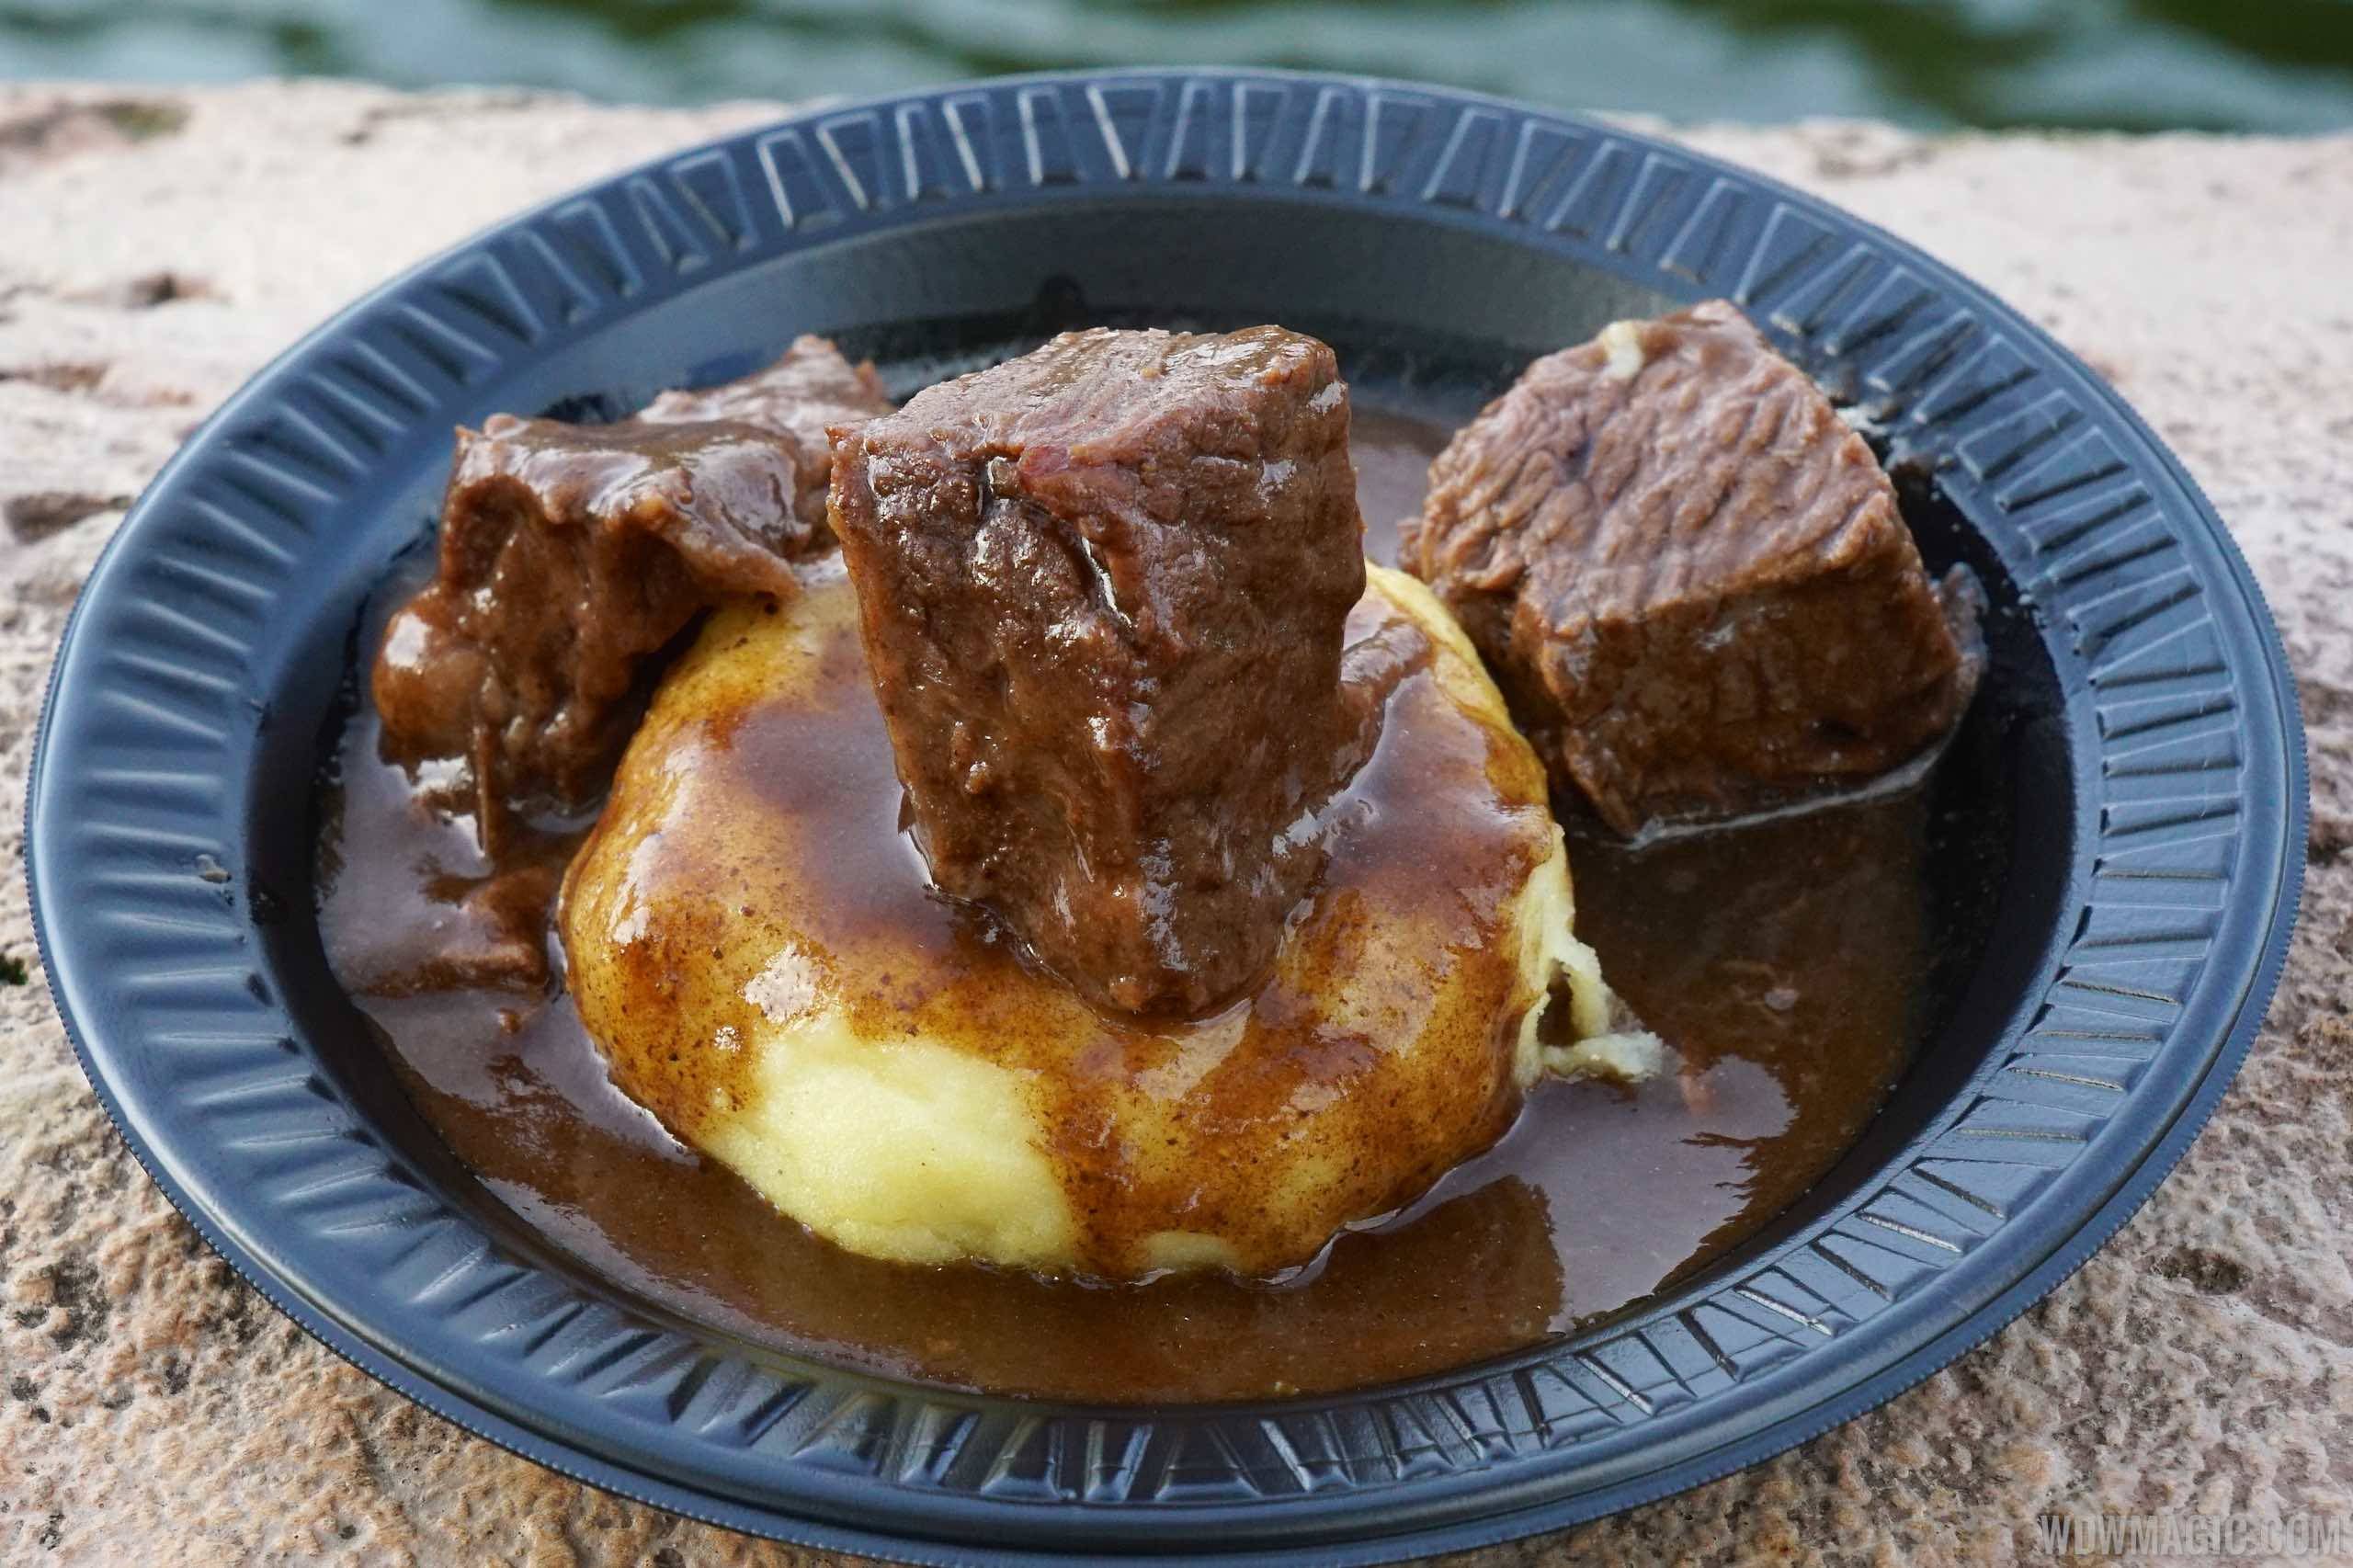 France - Boeuf bourguignon - Braised short ribs in cabernet with mashed potatoes